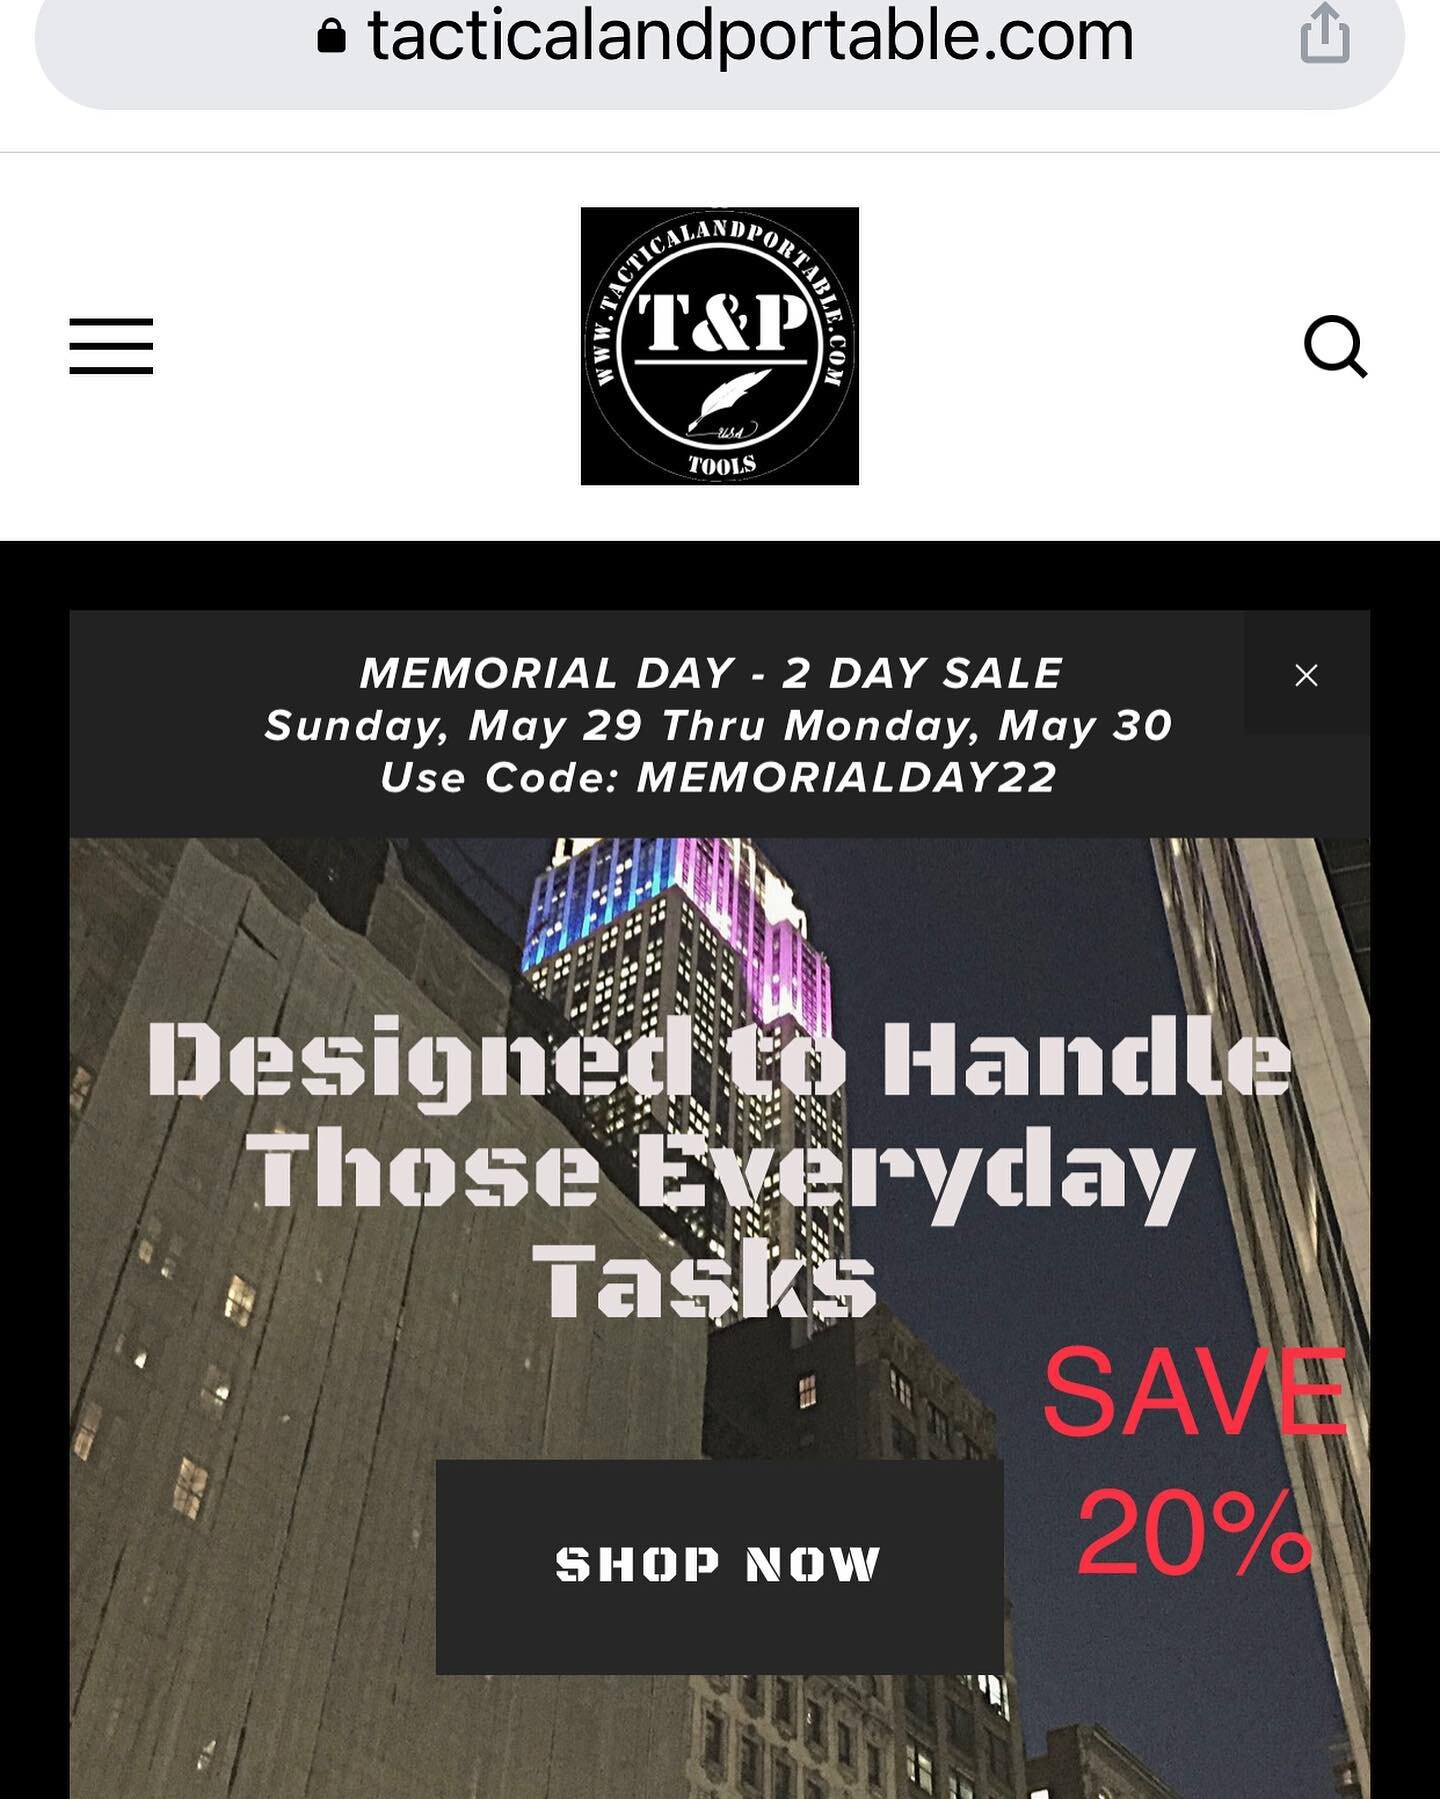 Memorial Day - 2 Day Sale
From now thru Monday, May 30 Save 20% Storewide.

Use Code: MEMORIALDAY22

Hope you are having a great weekend my friends!
-
-

 #edc #edcgear #utilityknife #carbonfiber #utilityblade #everydaycarry #g10 #tiedc #edcknife #ed